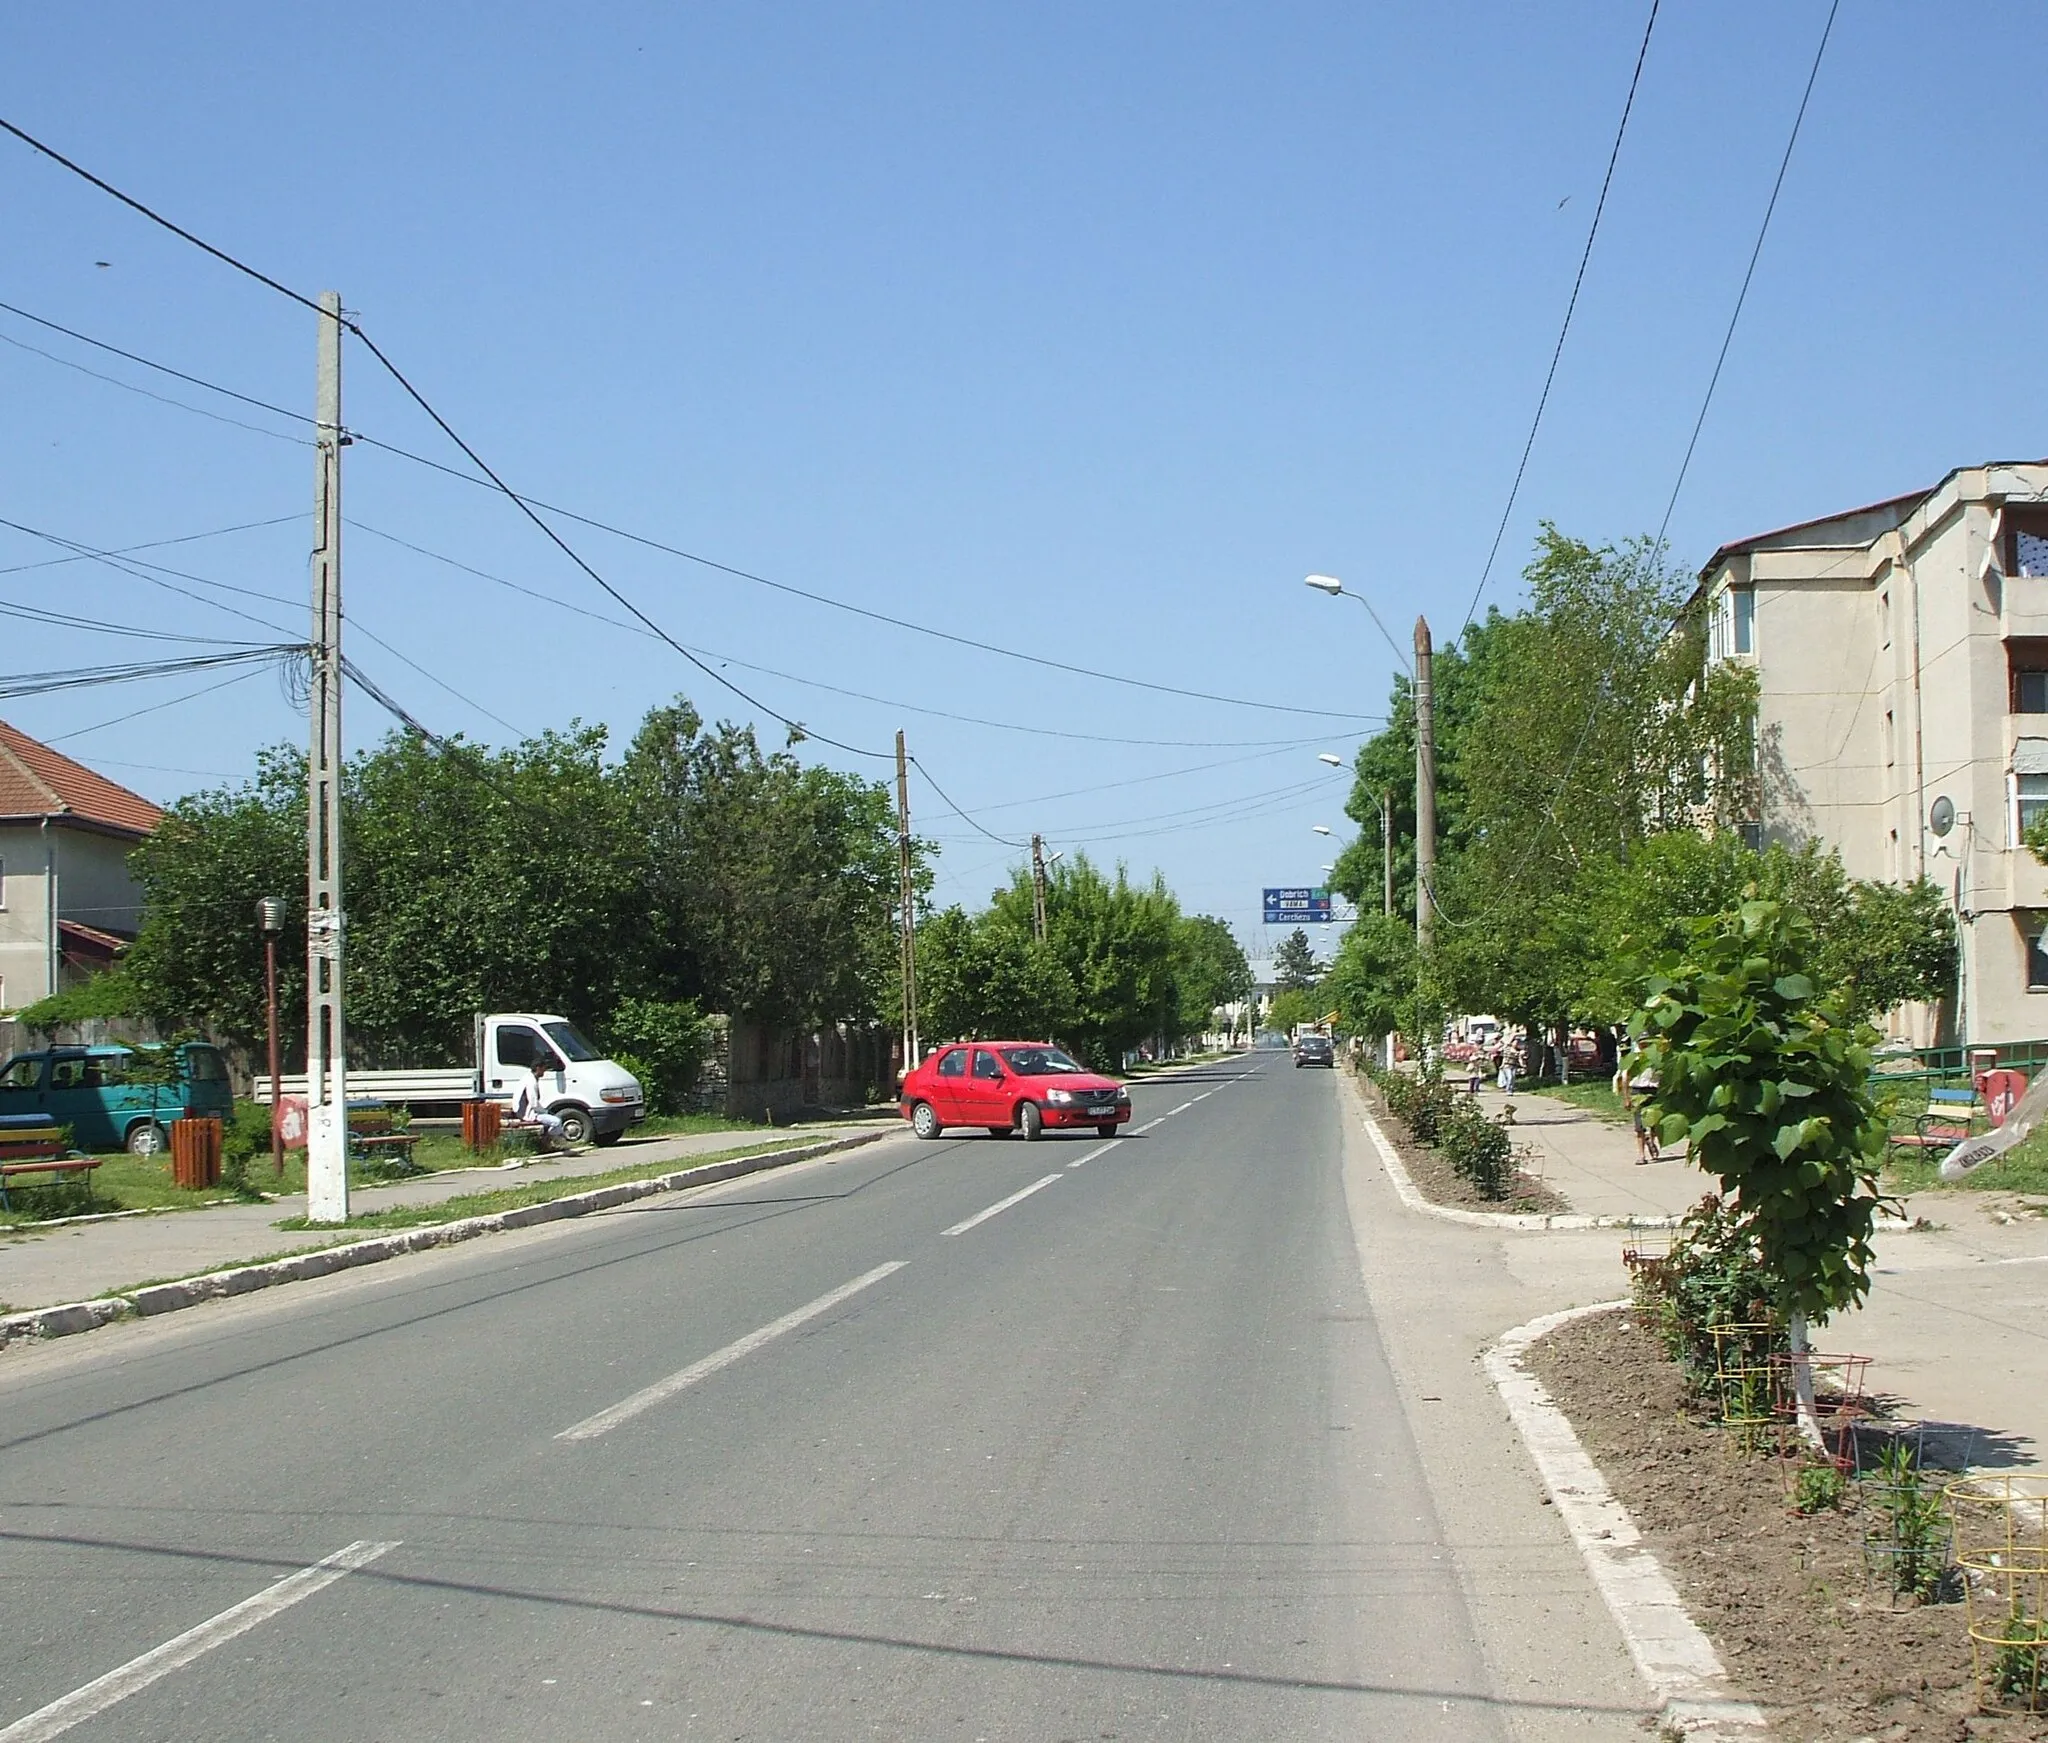 Photo showing: Negru Vodă town center. The local highschool is at the end of the main road in the picture.